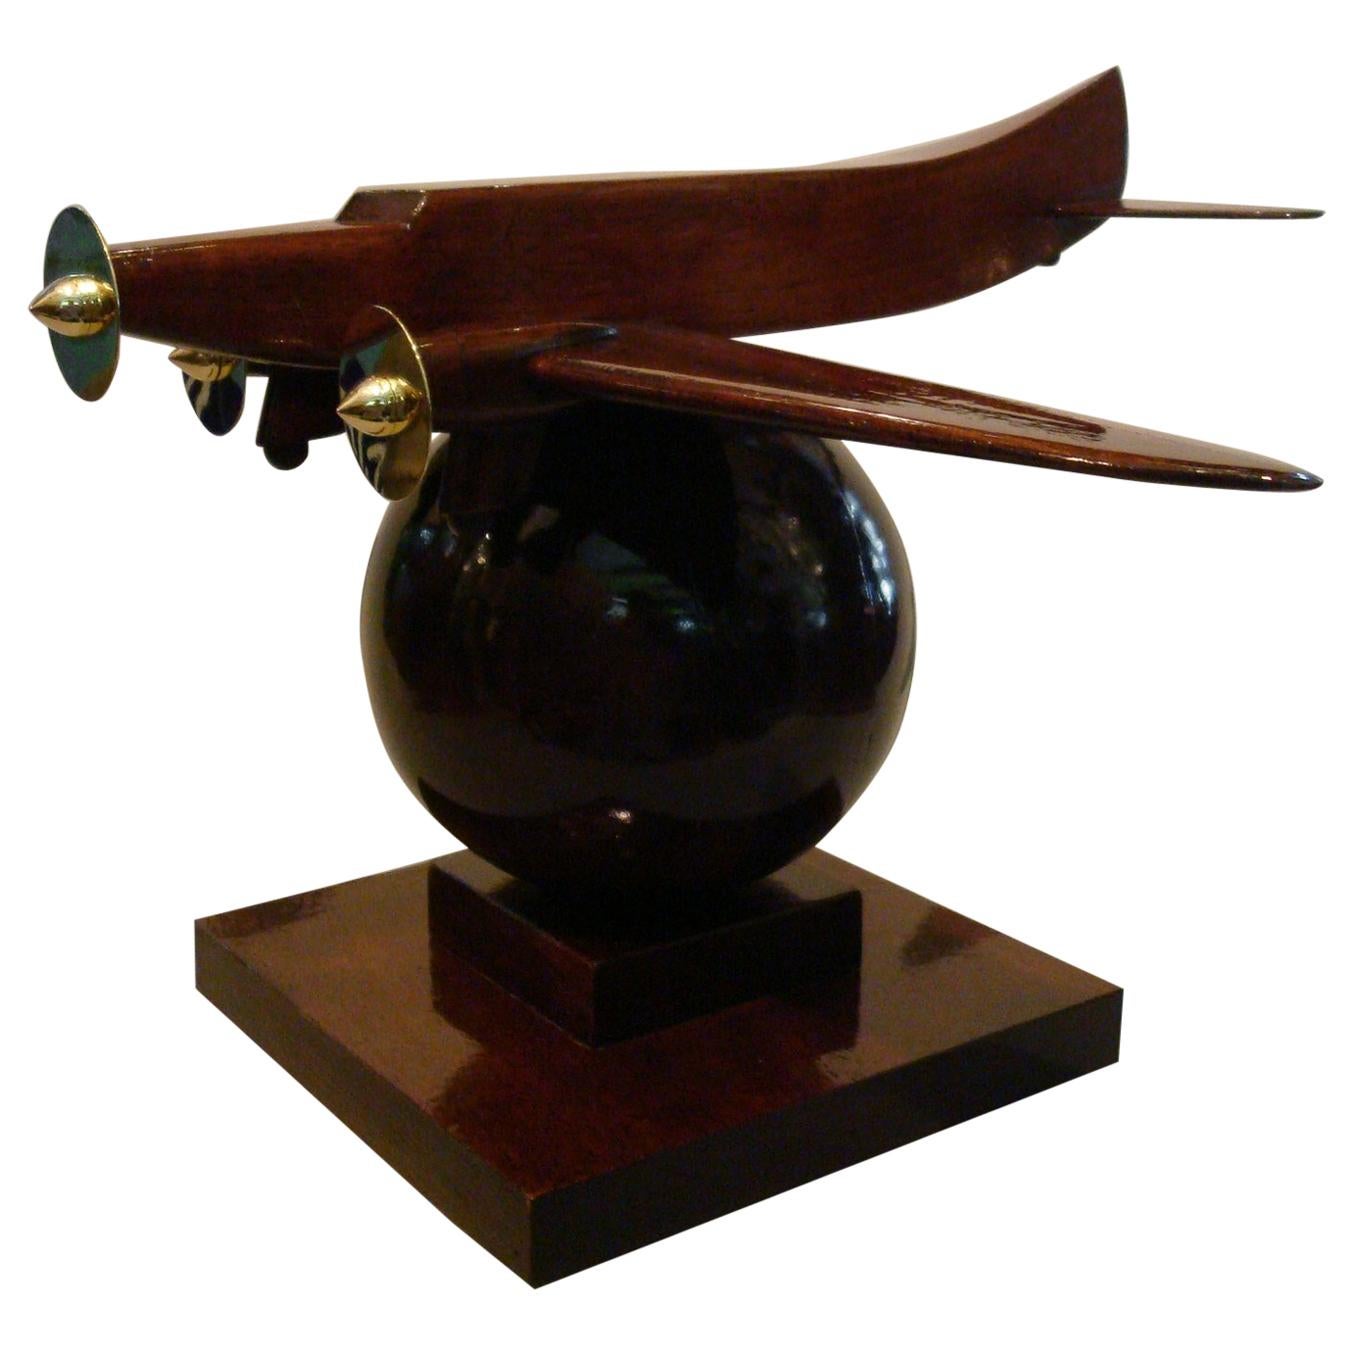 Art Deco Wooden Airplane Model of a Couzinet